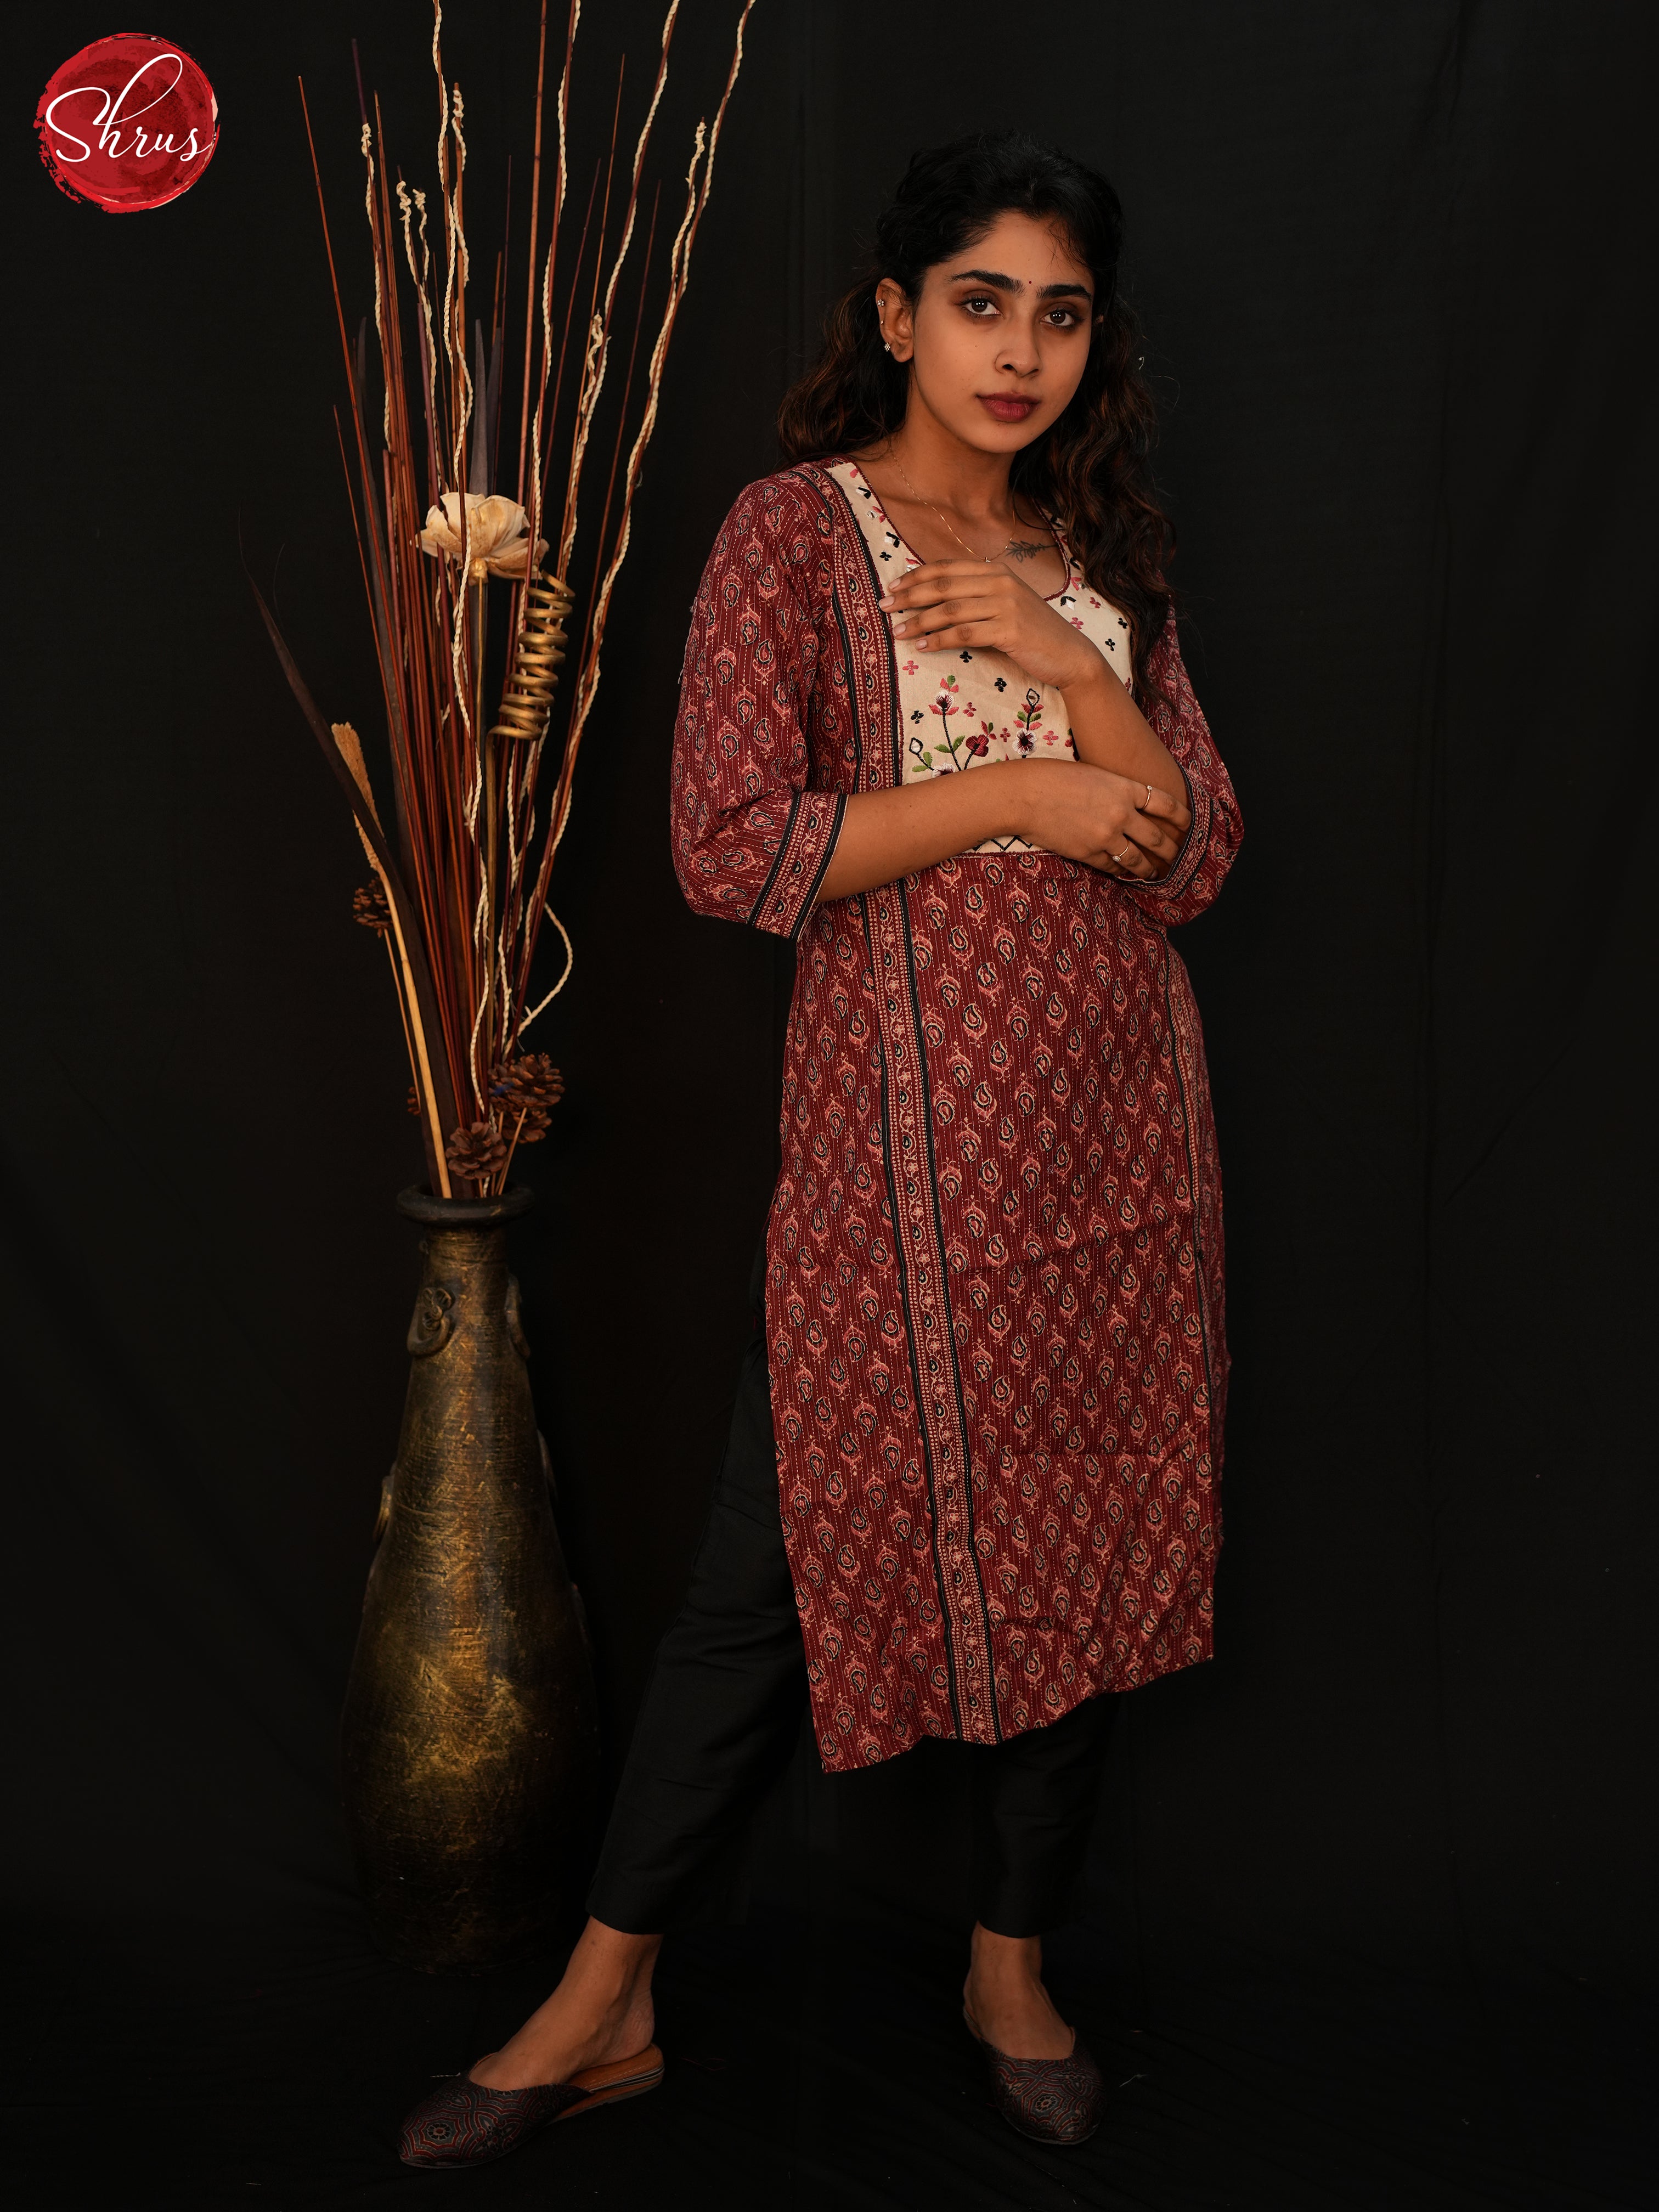 Brown & White - Readymade Cotton Straight Kurti with floral print - Shop on ShrusEternity.com